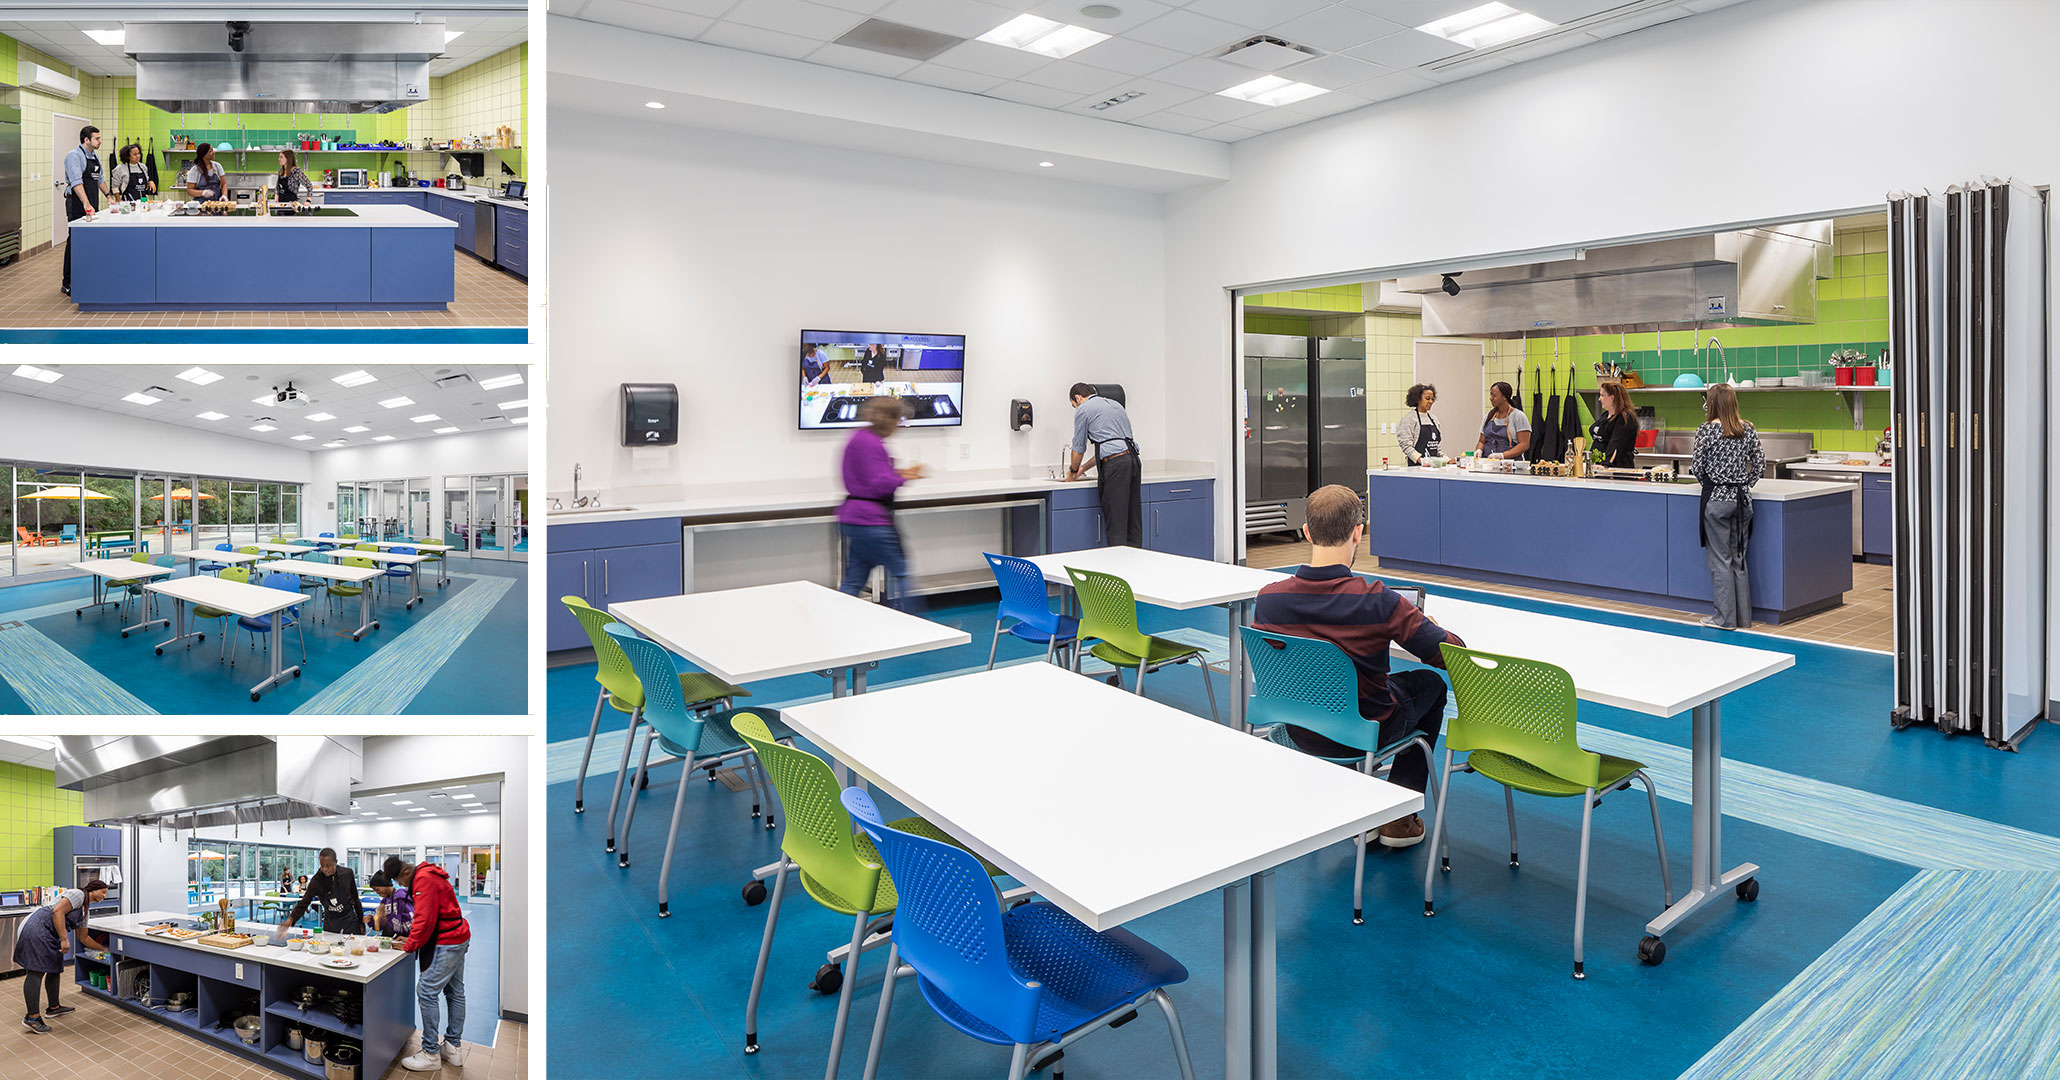 Boudreaux architects designed the interiors at the Richland Library Northeast Branch Location. This included a full service educational kitchen.